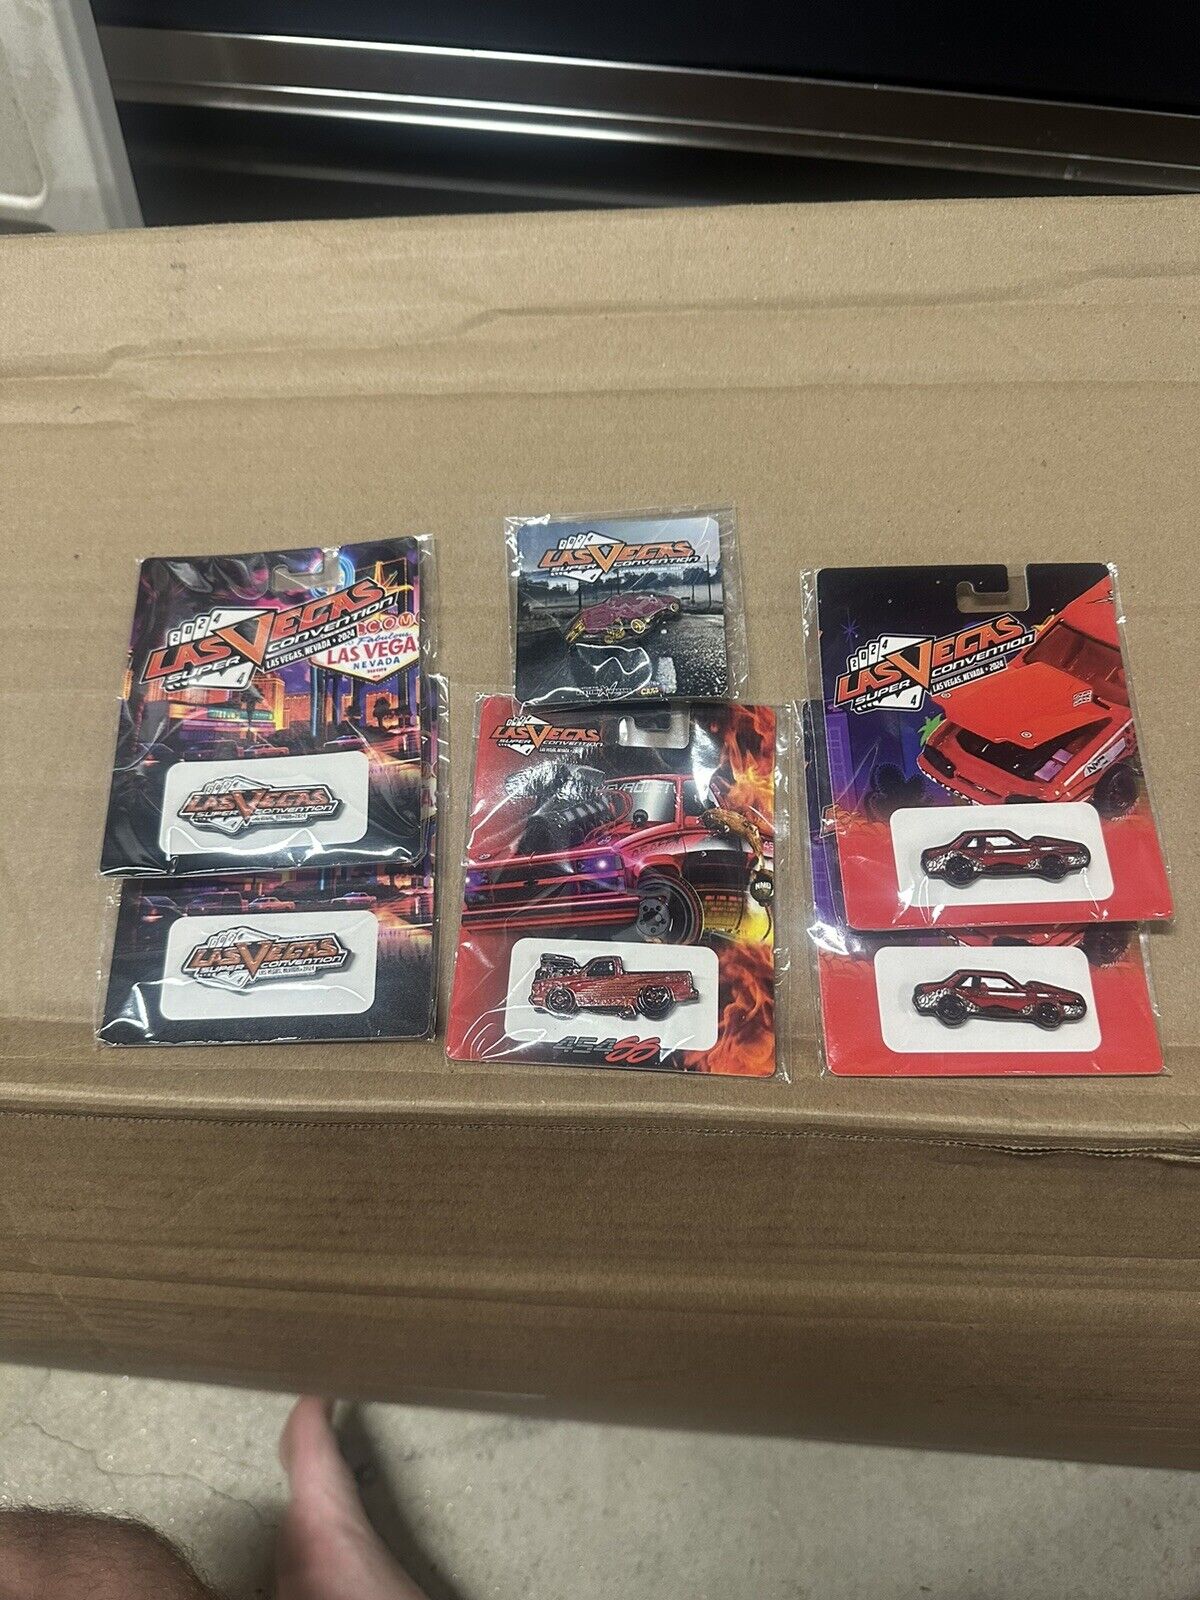 Las Vegas Diecast Collectors Convention Pin Chevy Regal Lot Of 6 Hot Wheels Leen